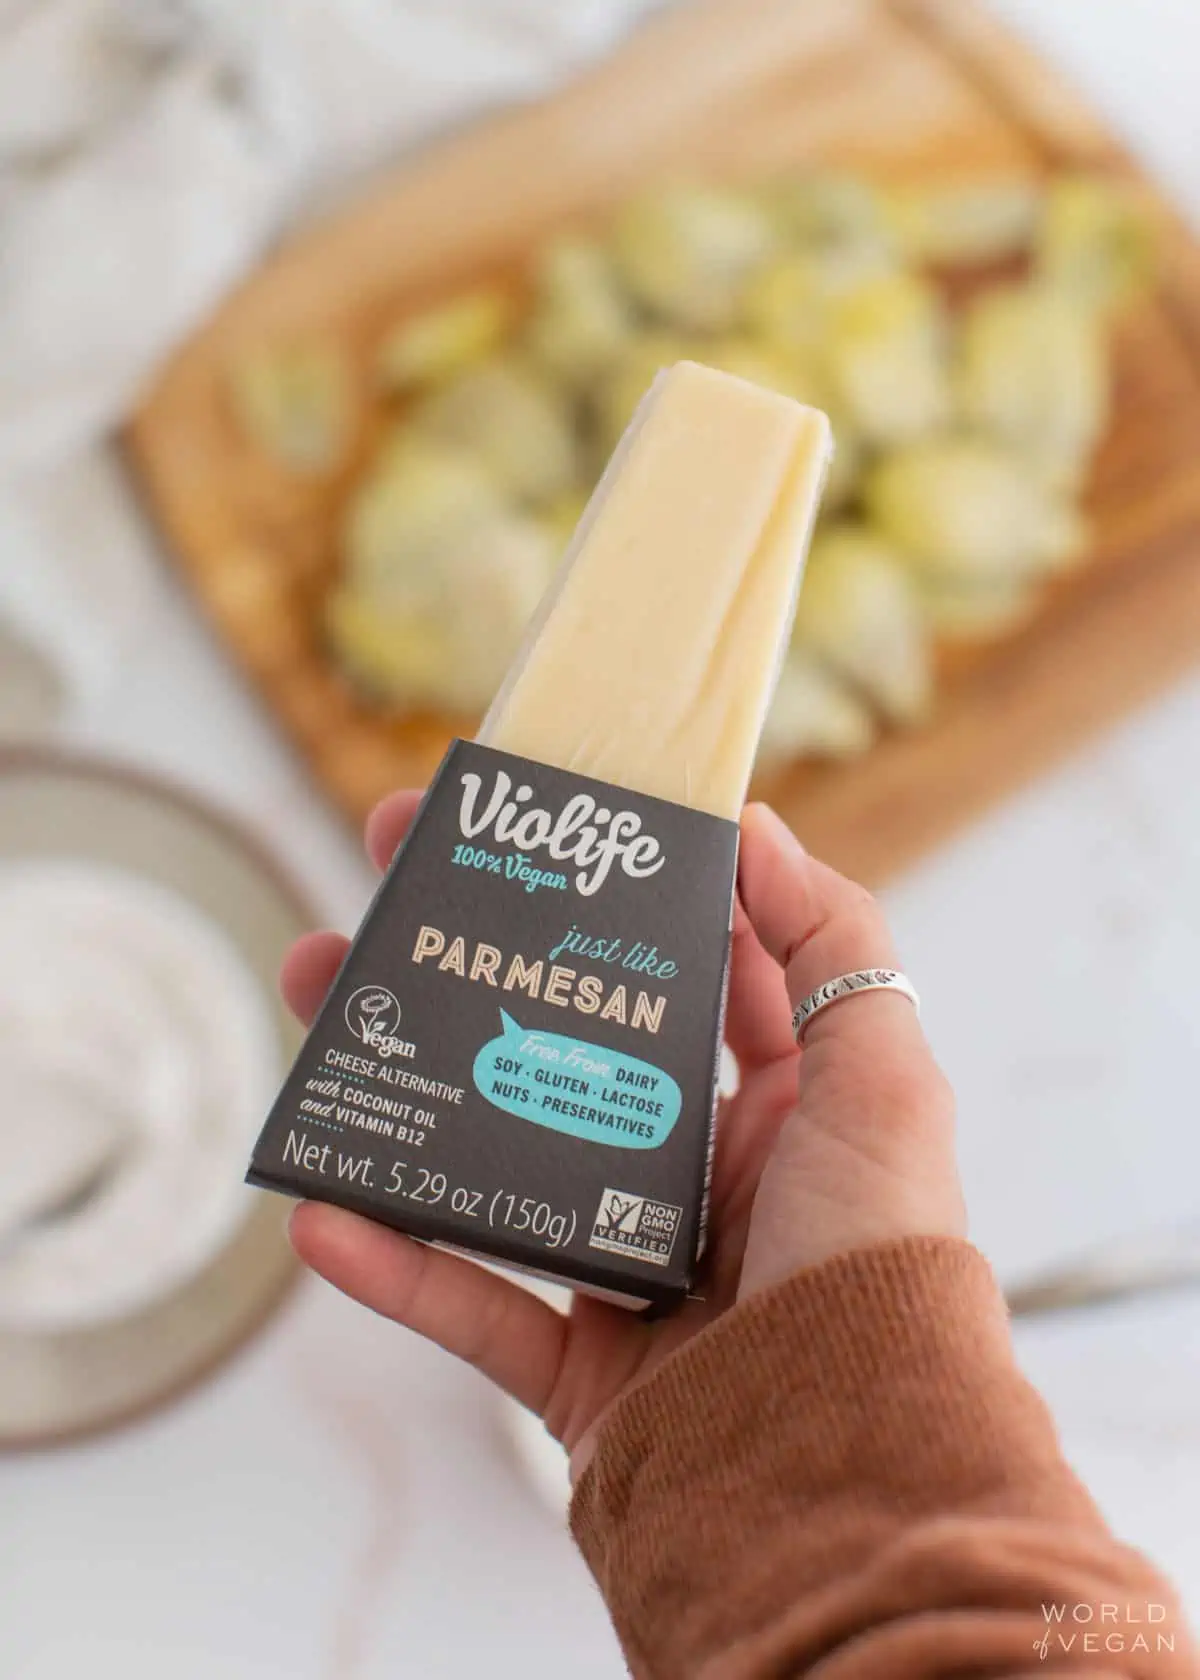 A hand holding a block of Violife brand vegan parmesan cheese.